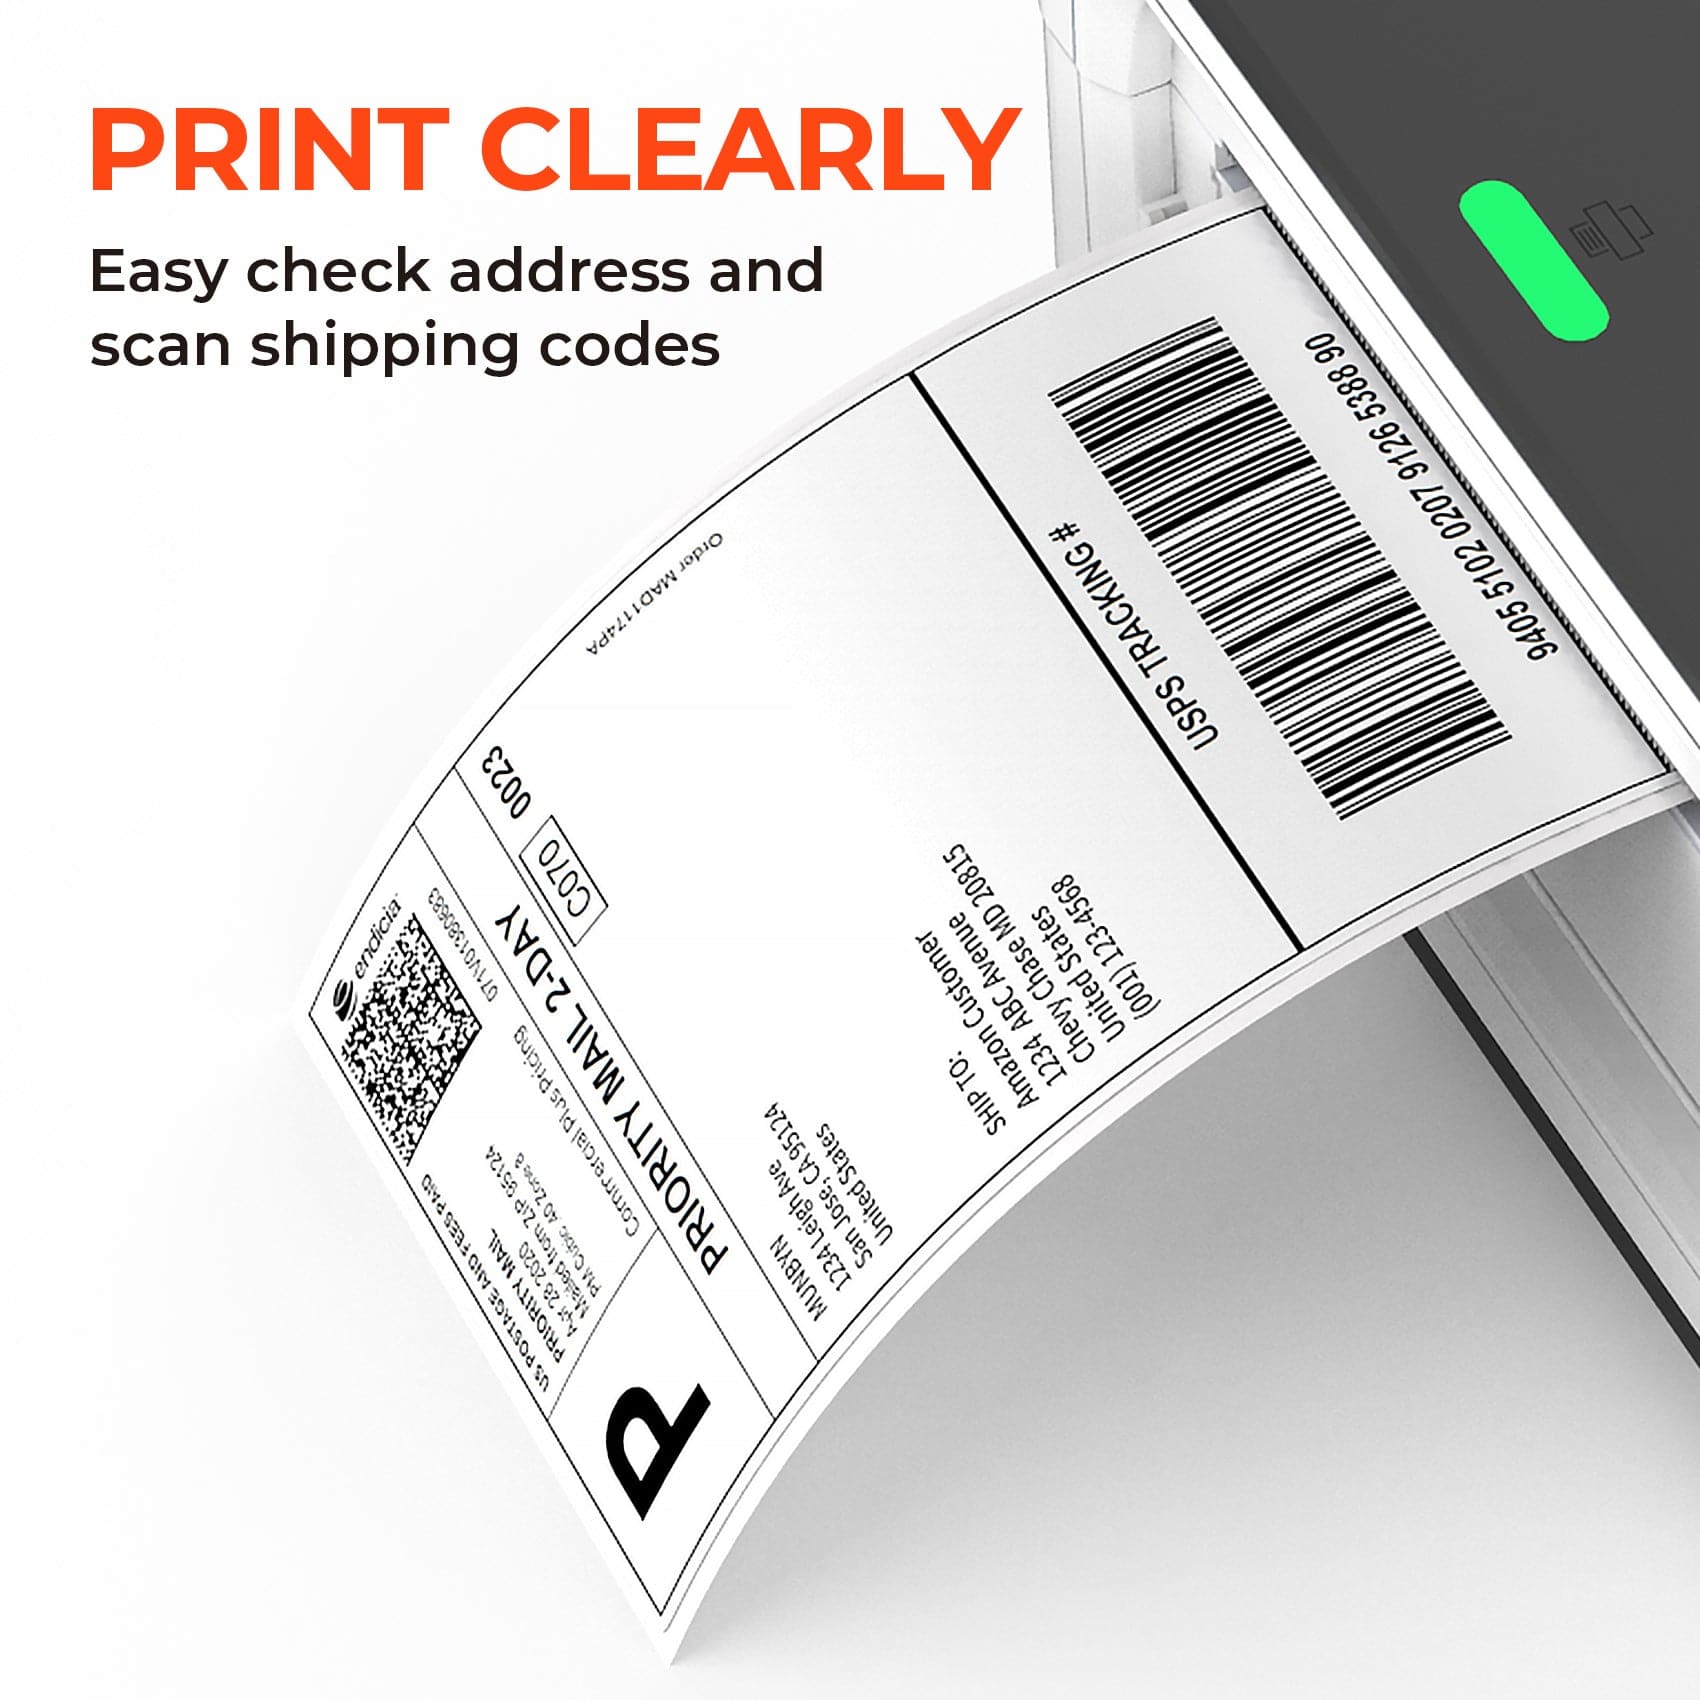 4*6 Thermal Shipping Label for -500 Labels / Pack-Clear Images and Easy-to-Read Barcodes